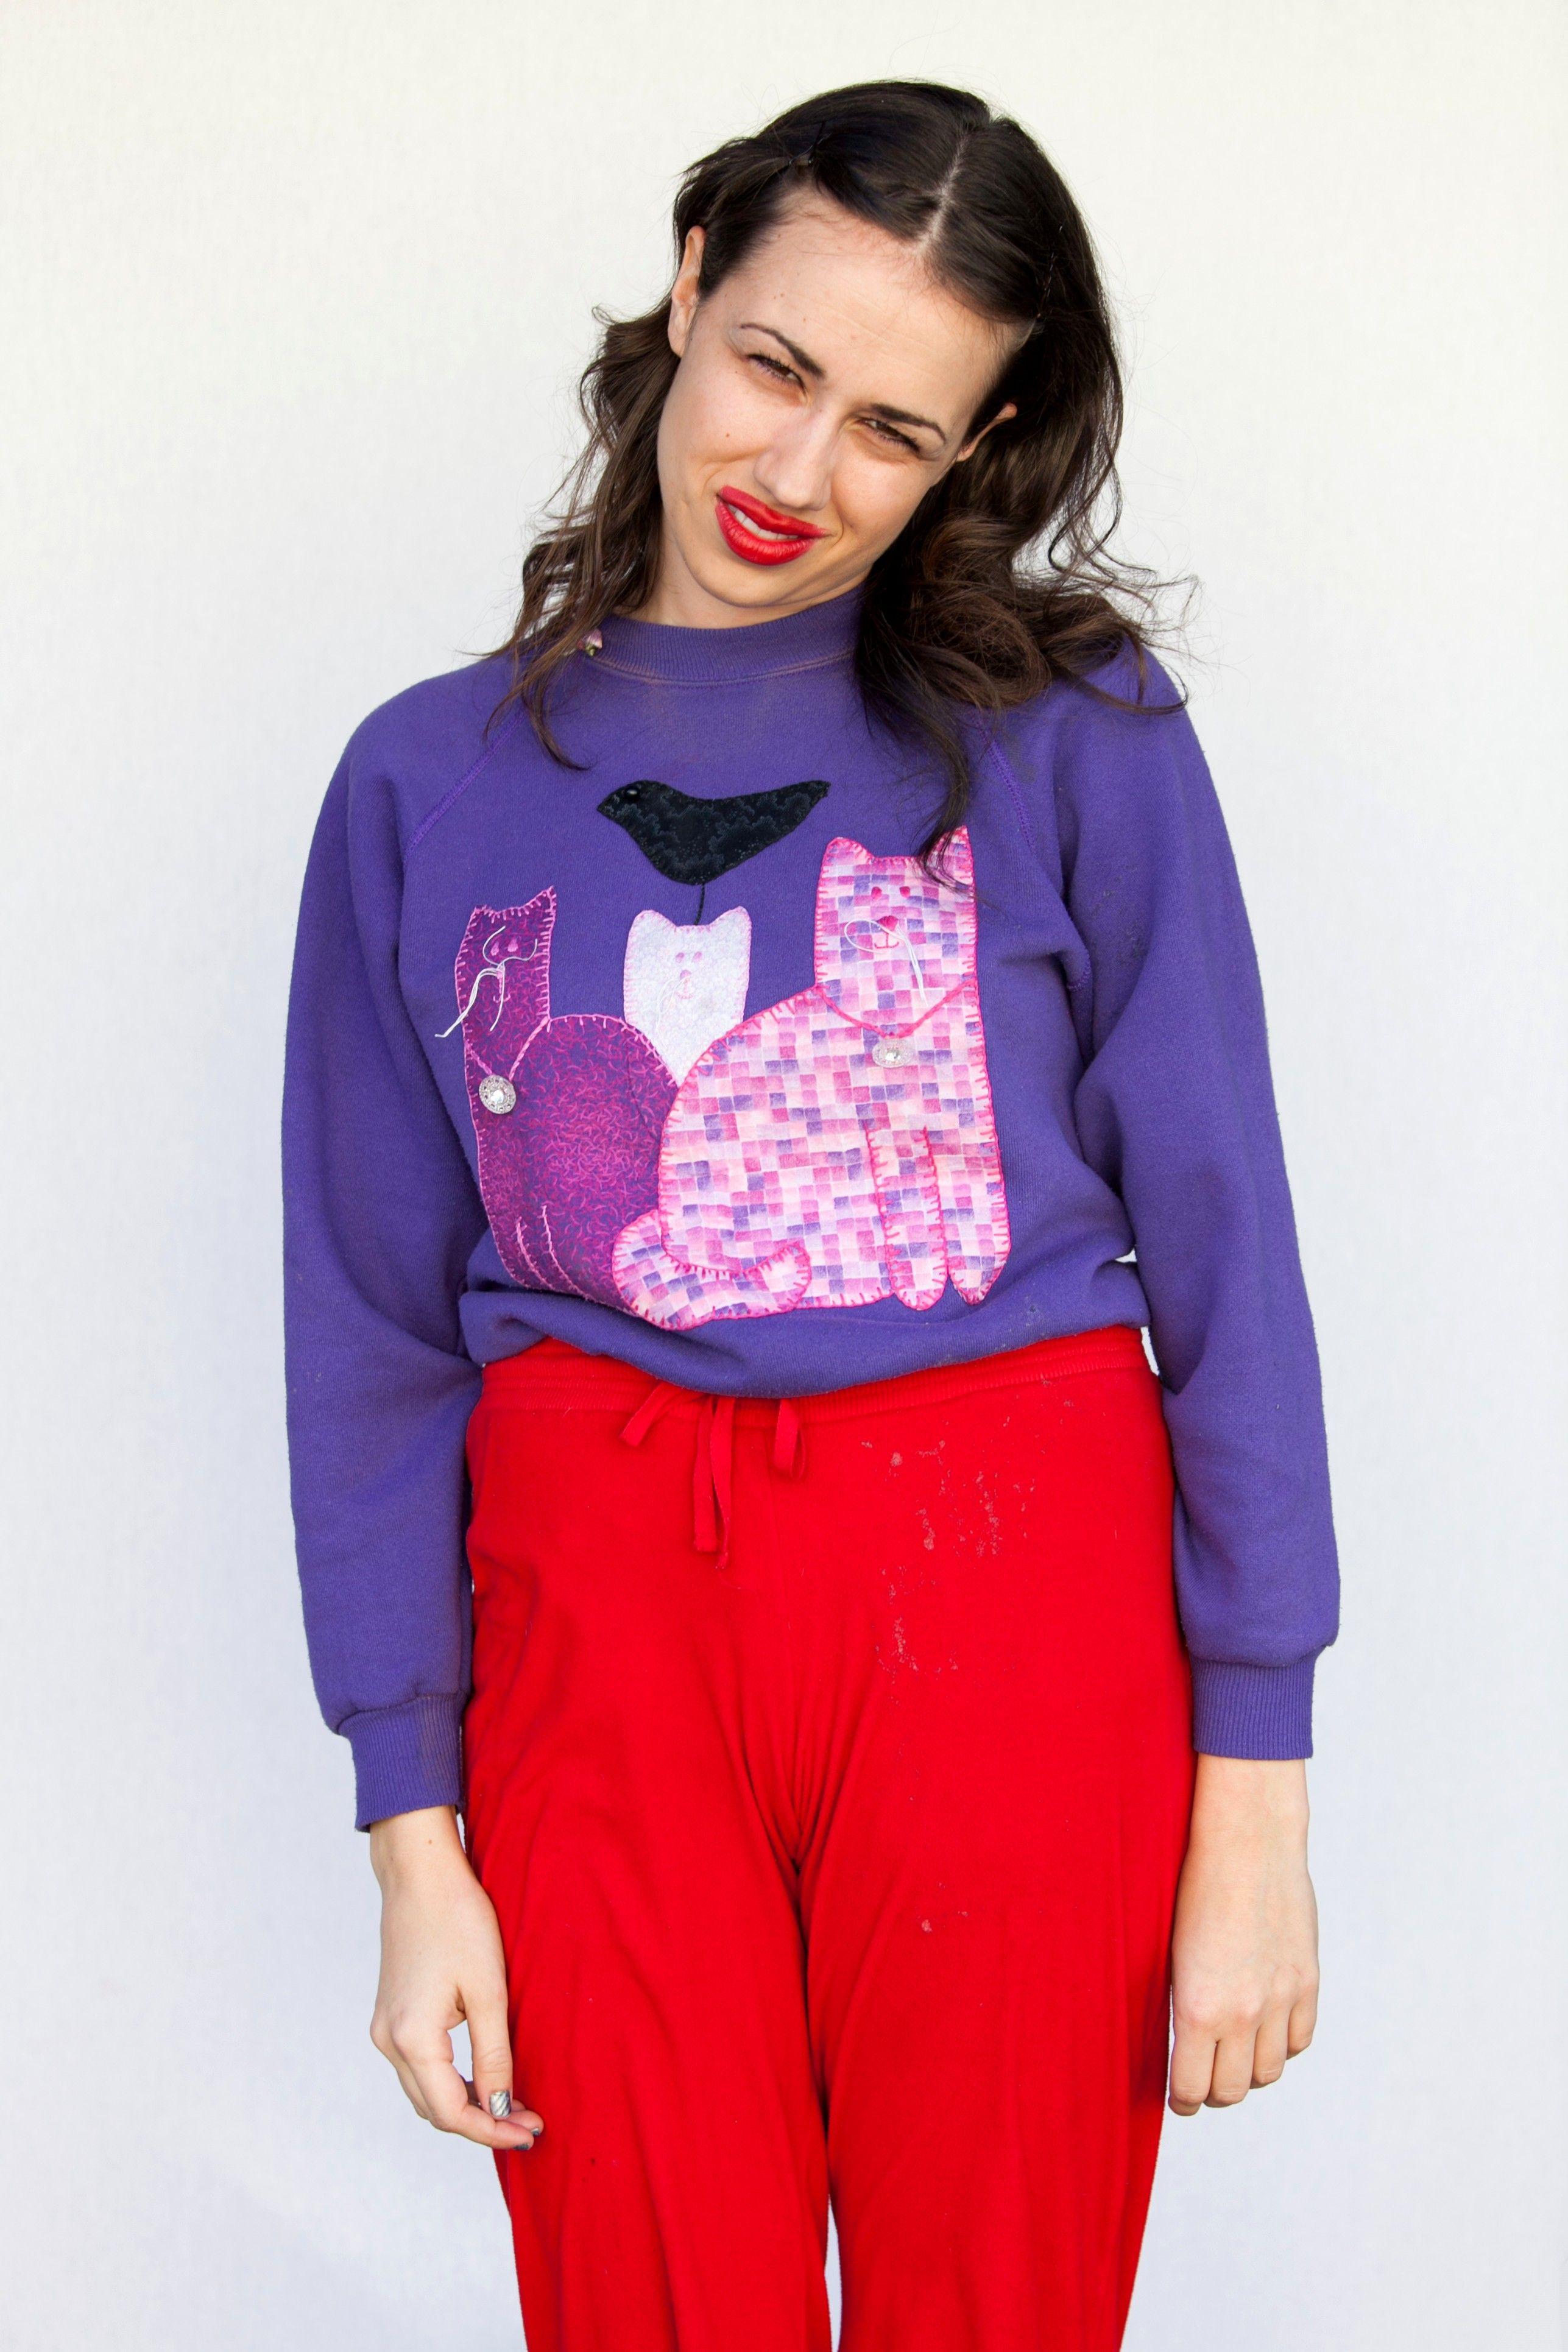 Miranda SIngs image The Way HD wallpapers and backgrounds photos.